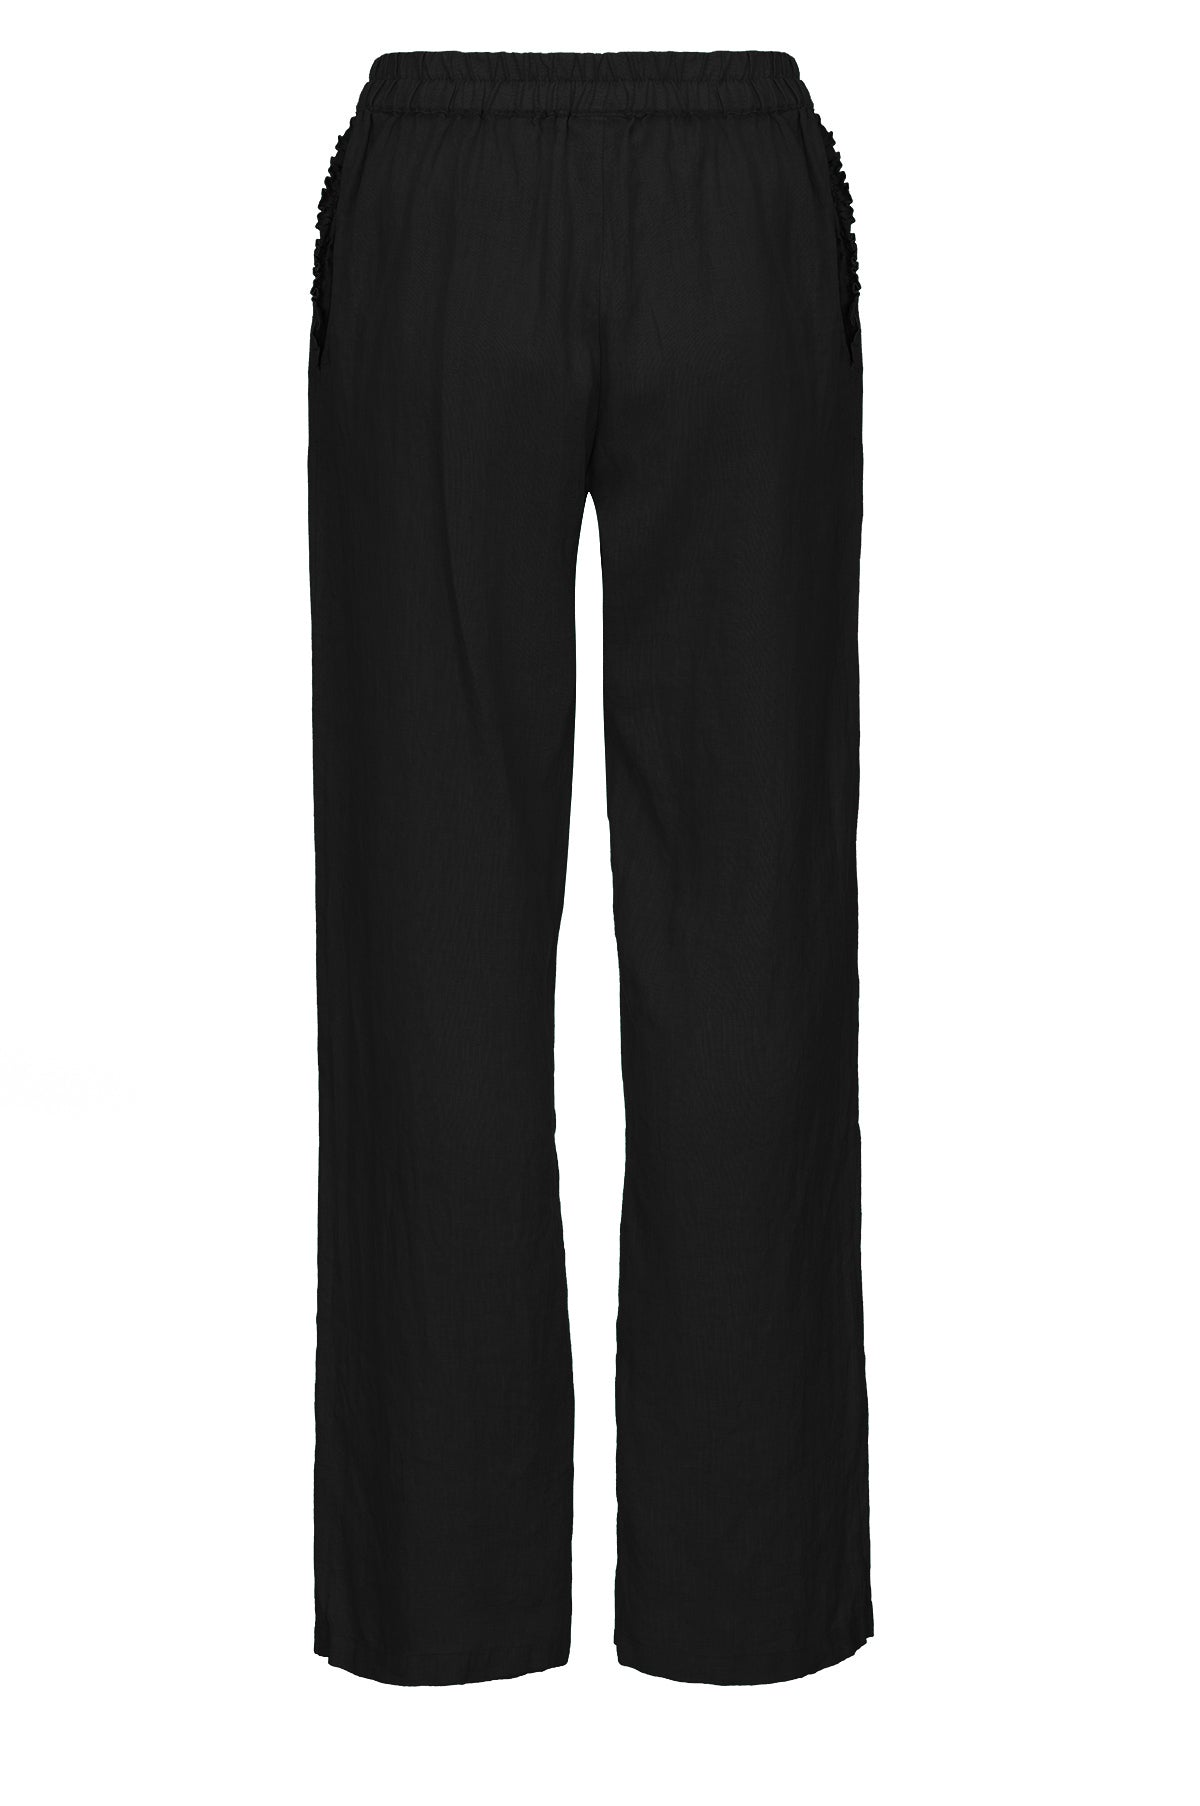 LUXZUZ // ONE TWO Oline Pant Pant 999 Black